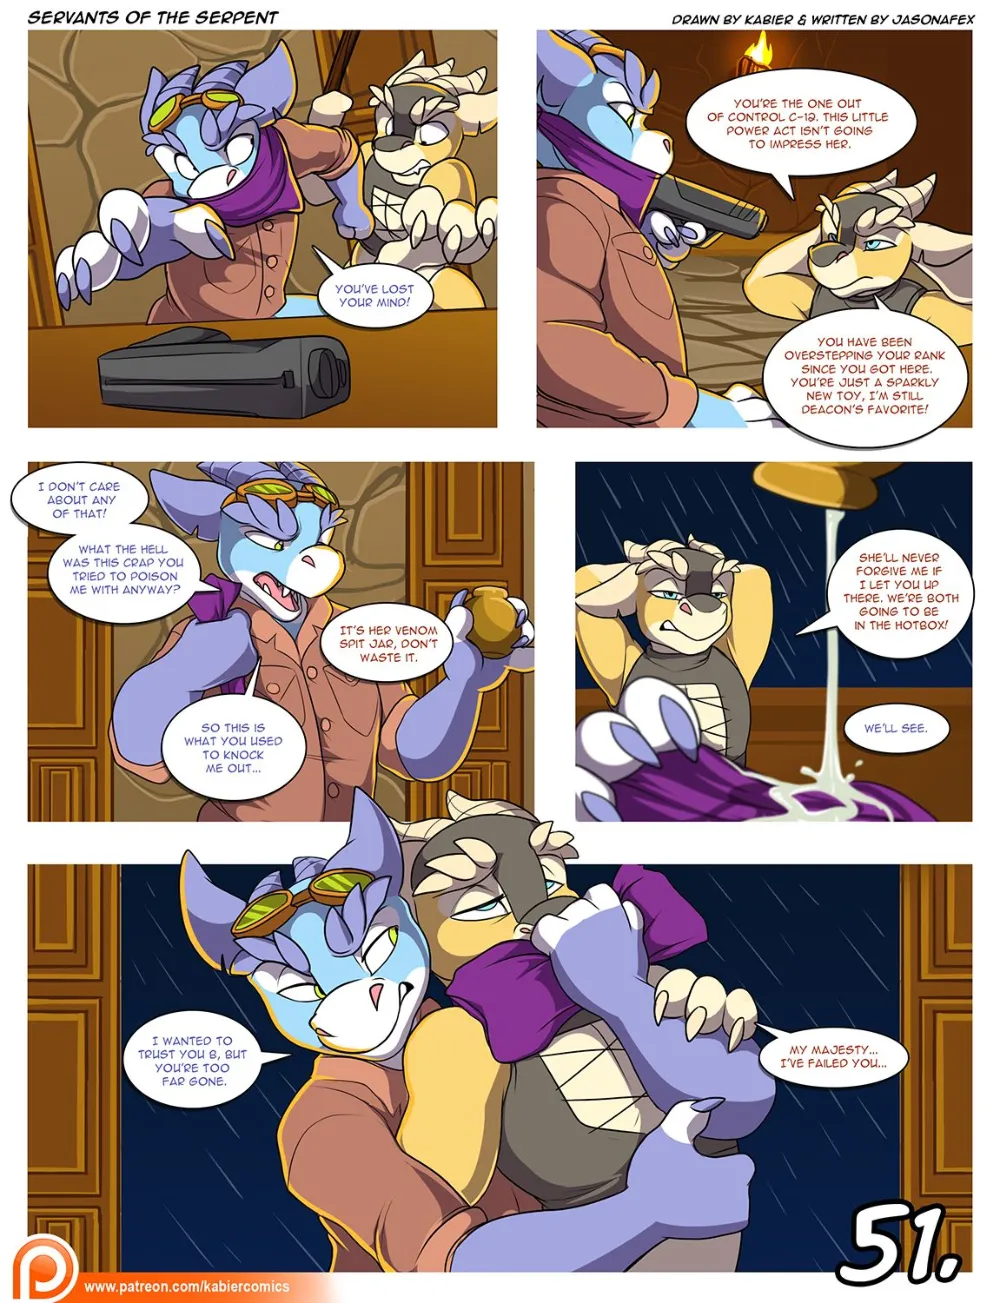 Kabier – Servants of the Serpent - Page 52